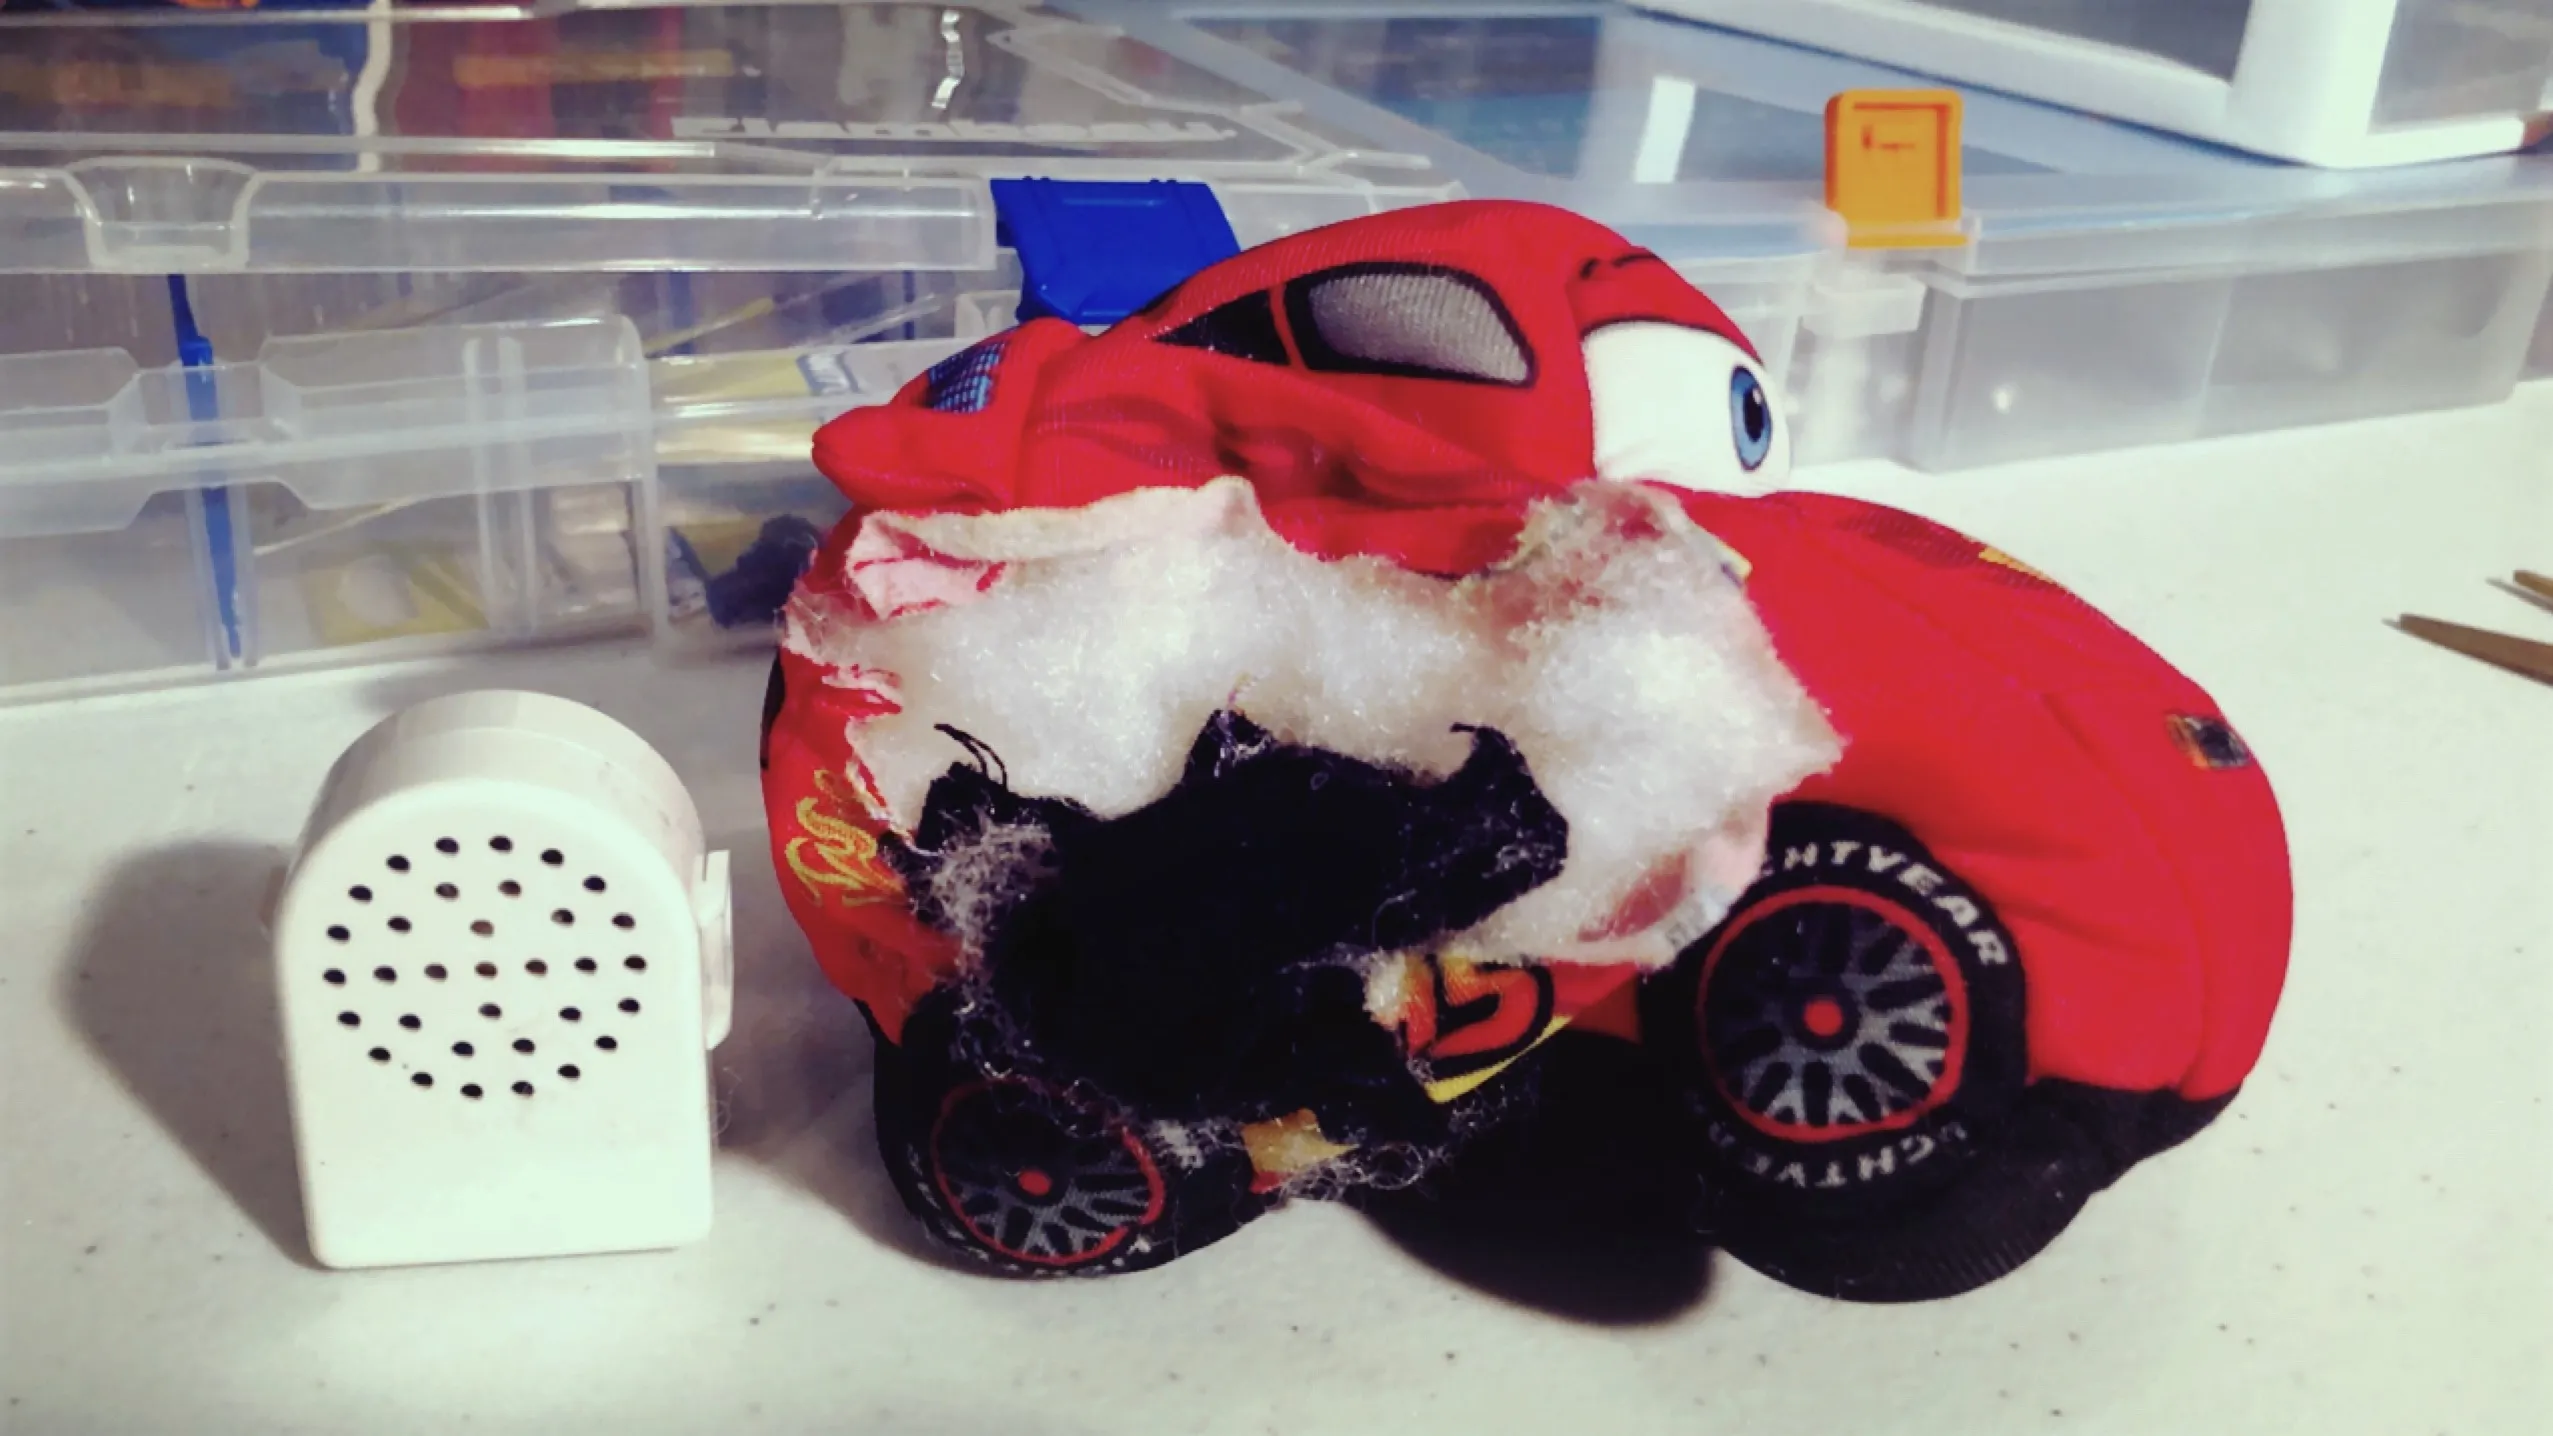 A cut-open stuffed toy car with its sound module sitting next to it